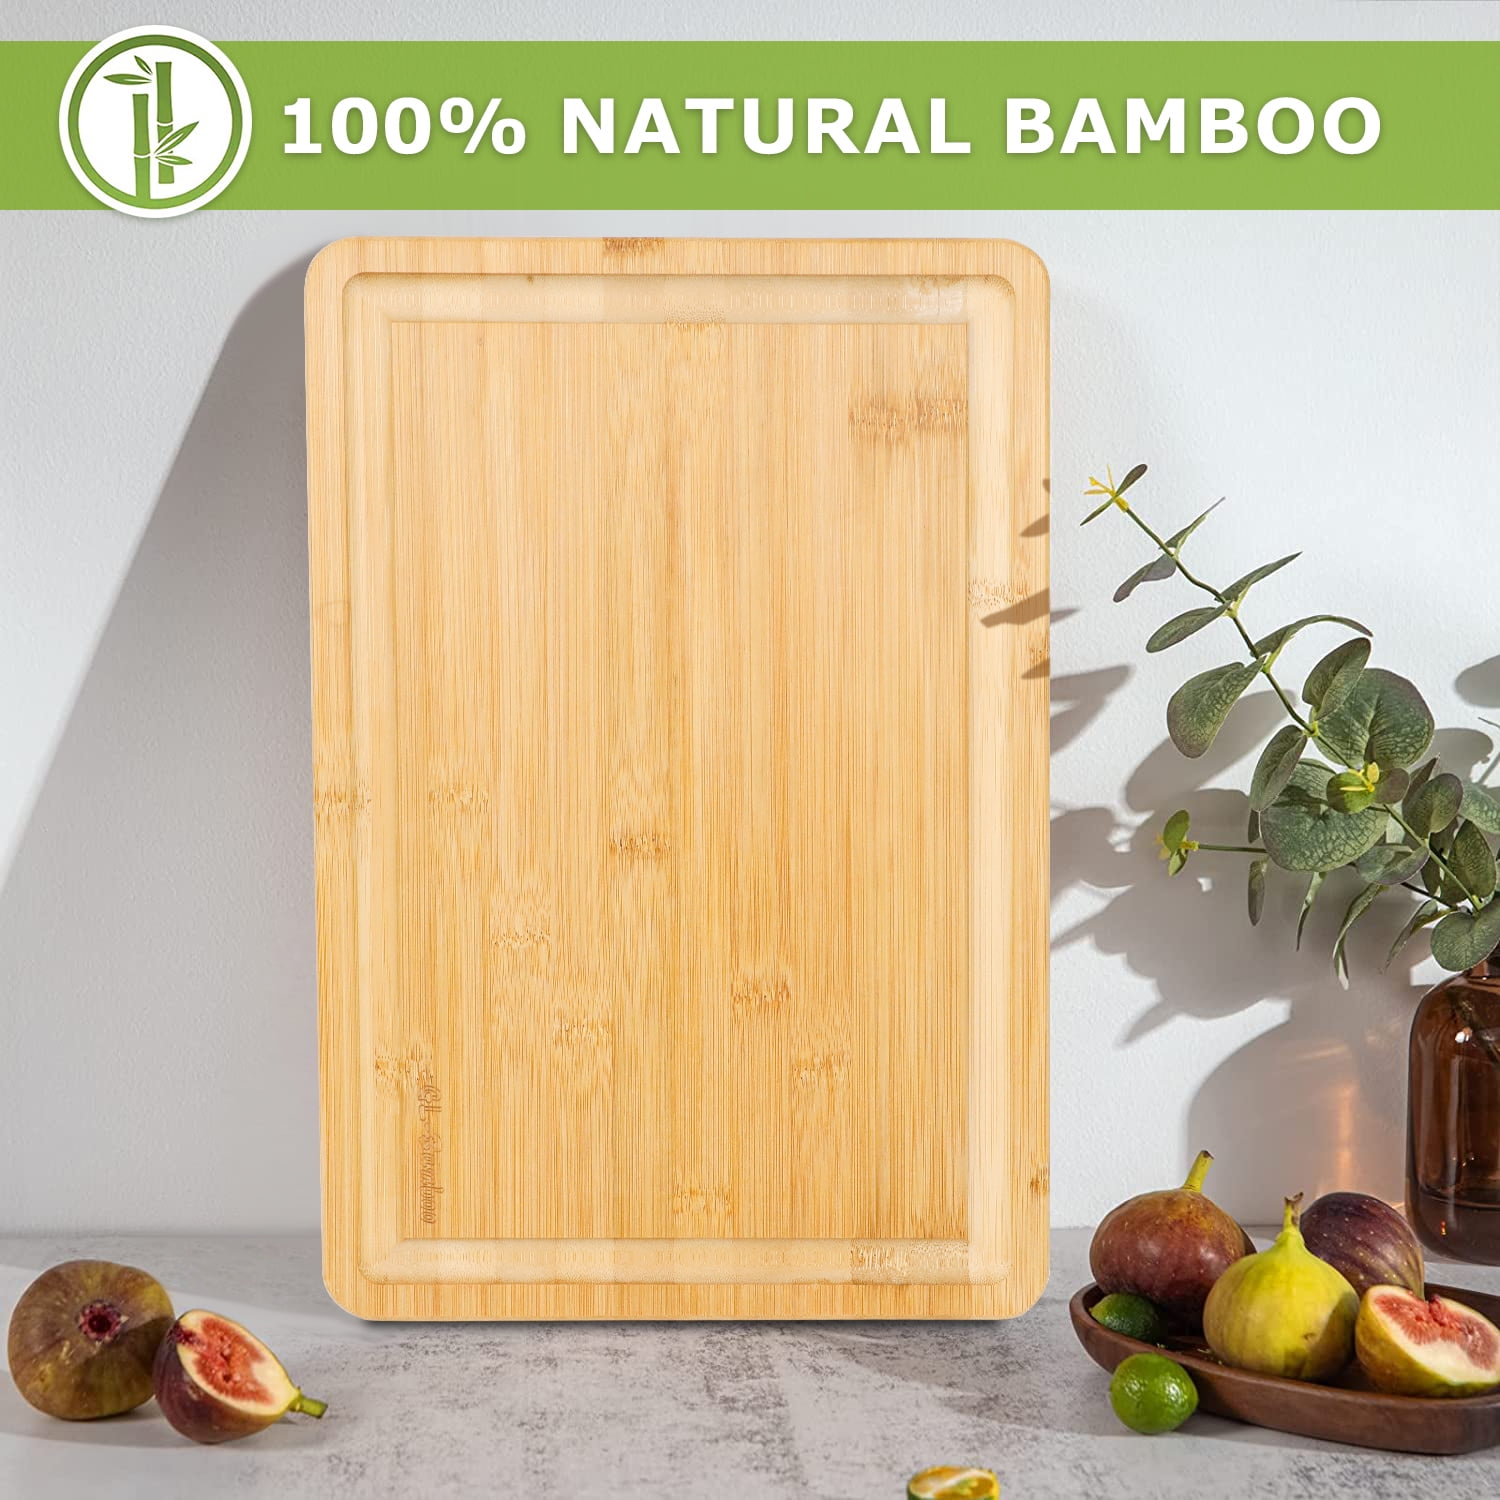 Smirly Large 13 x 17 Bamboo Cutting Board at Menards®